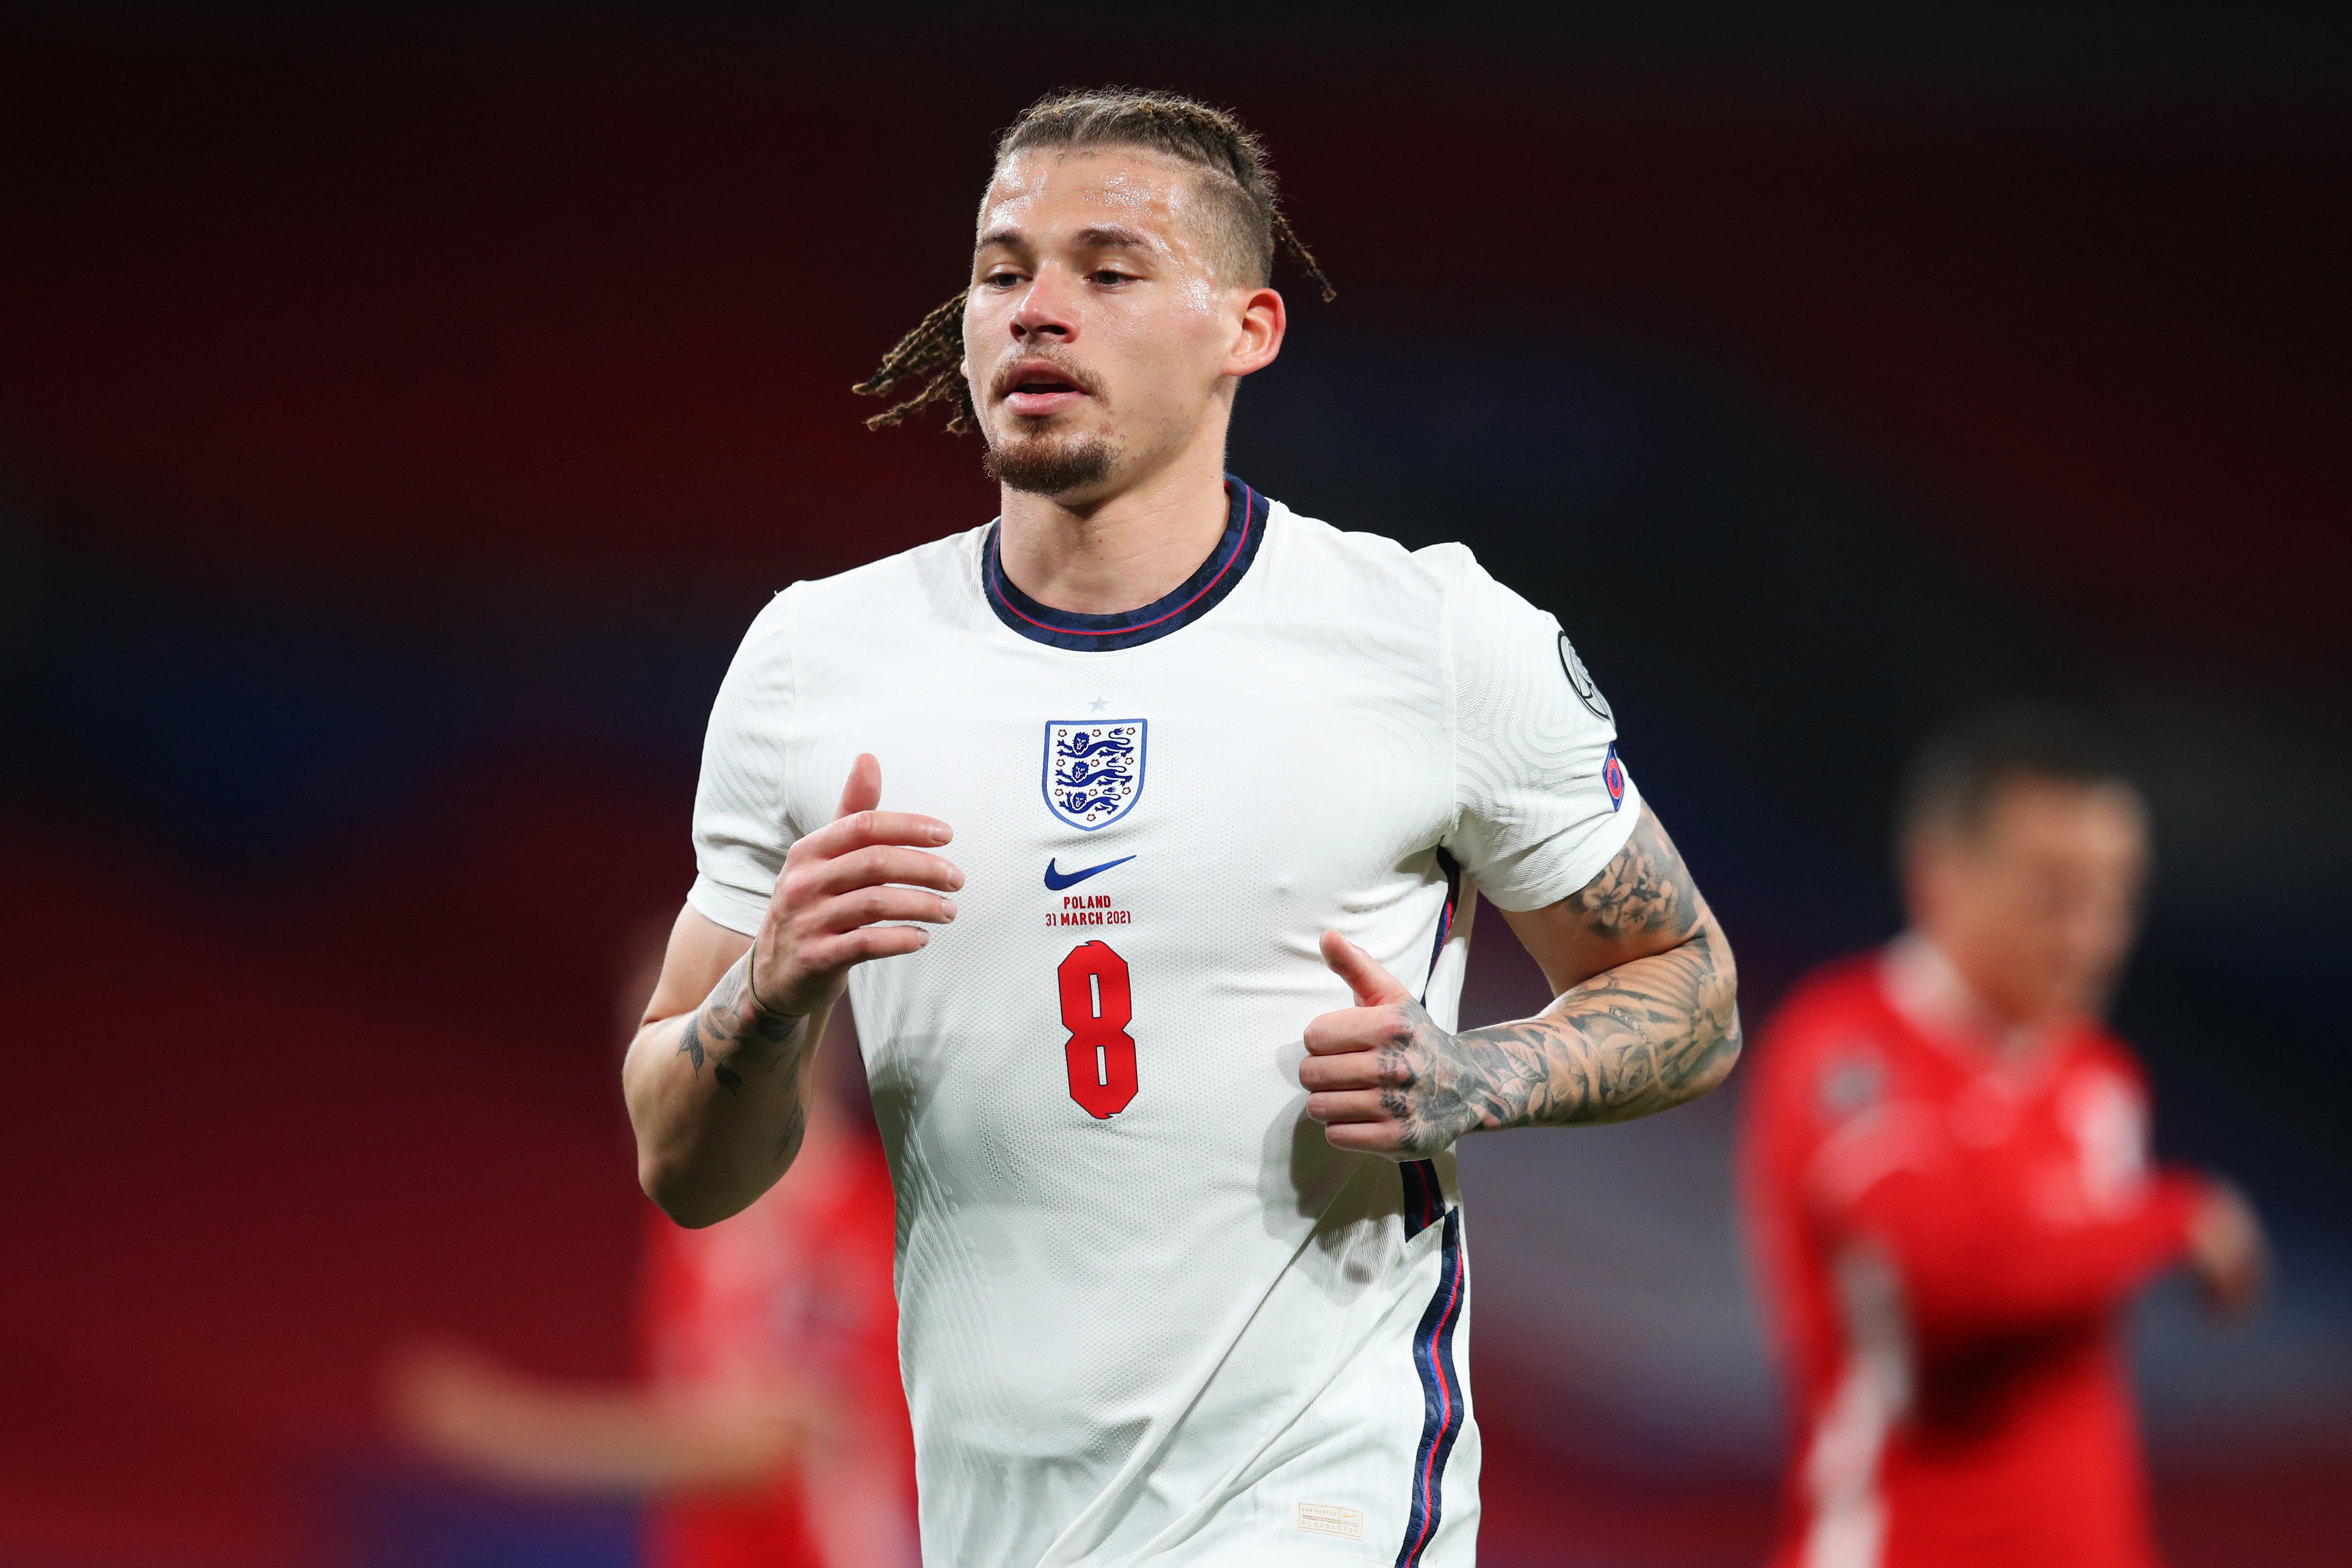 England midfielder Kalvin Phillips on Euro place: “I keep working hard then why not?”